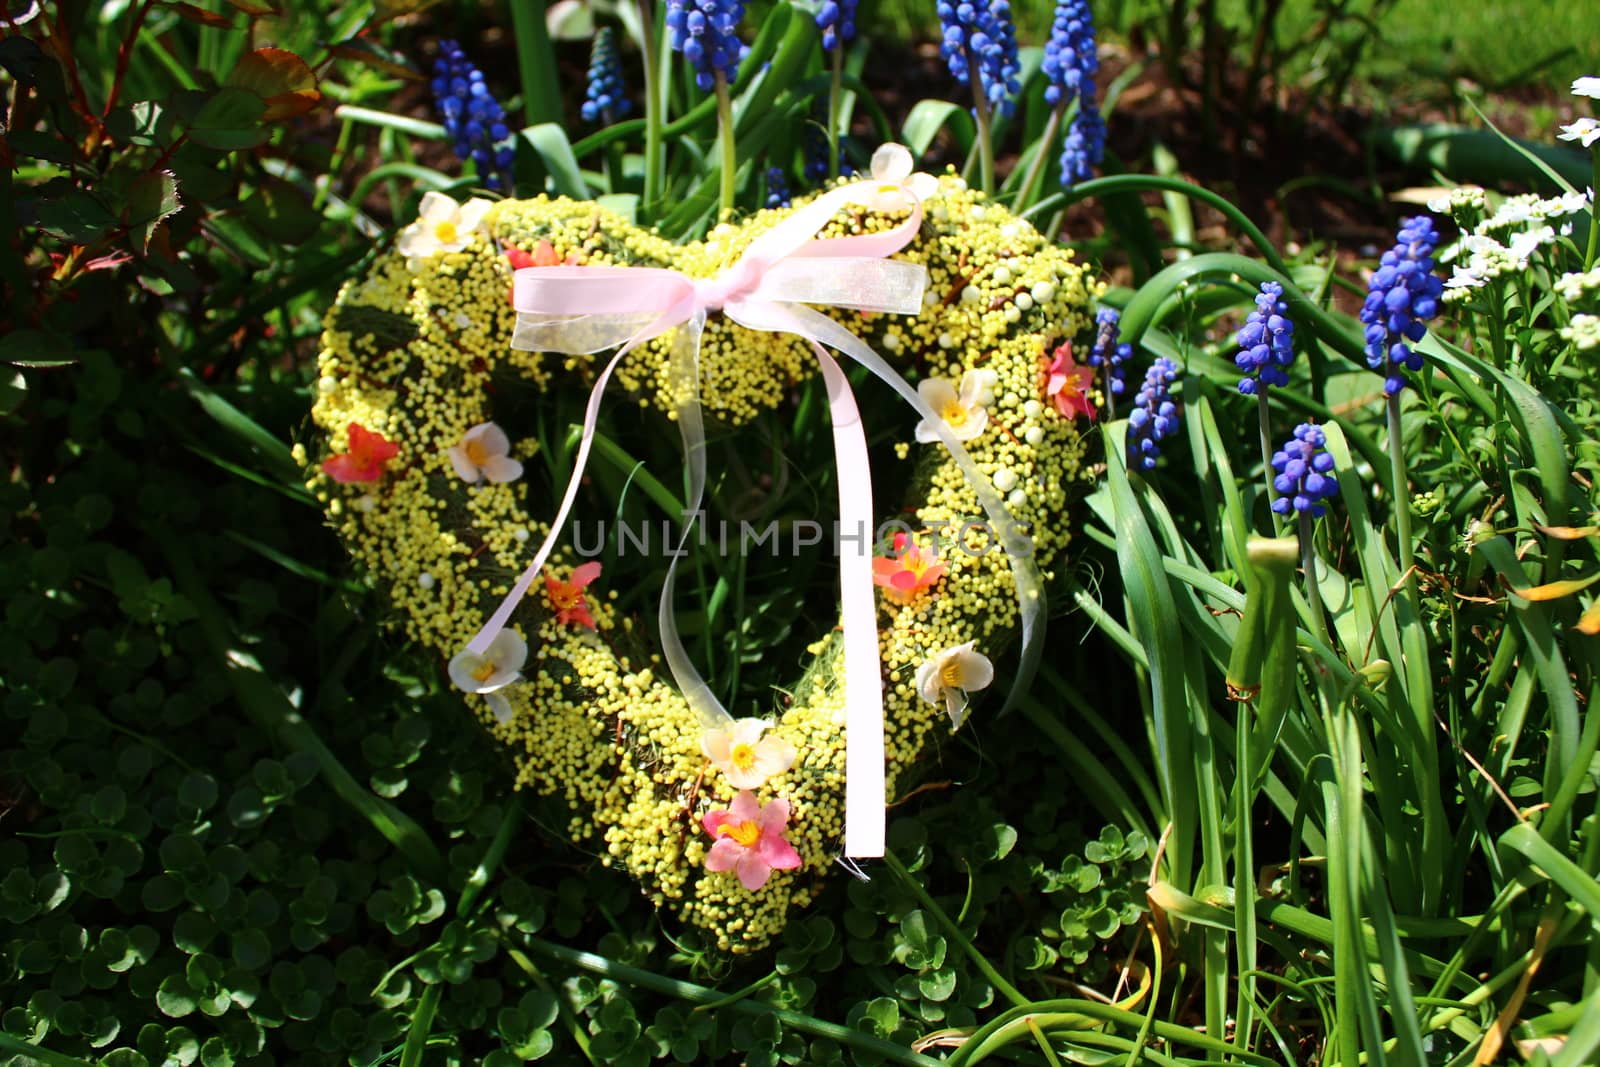 The picture shows a romantic heart in grape hyacinths.